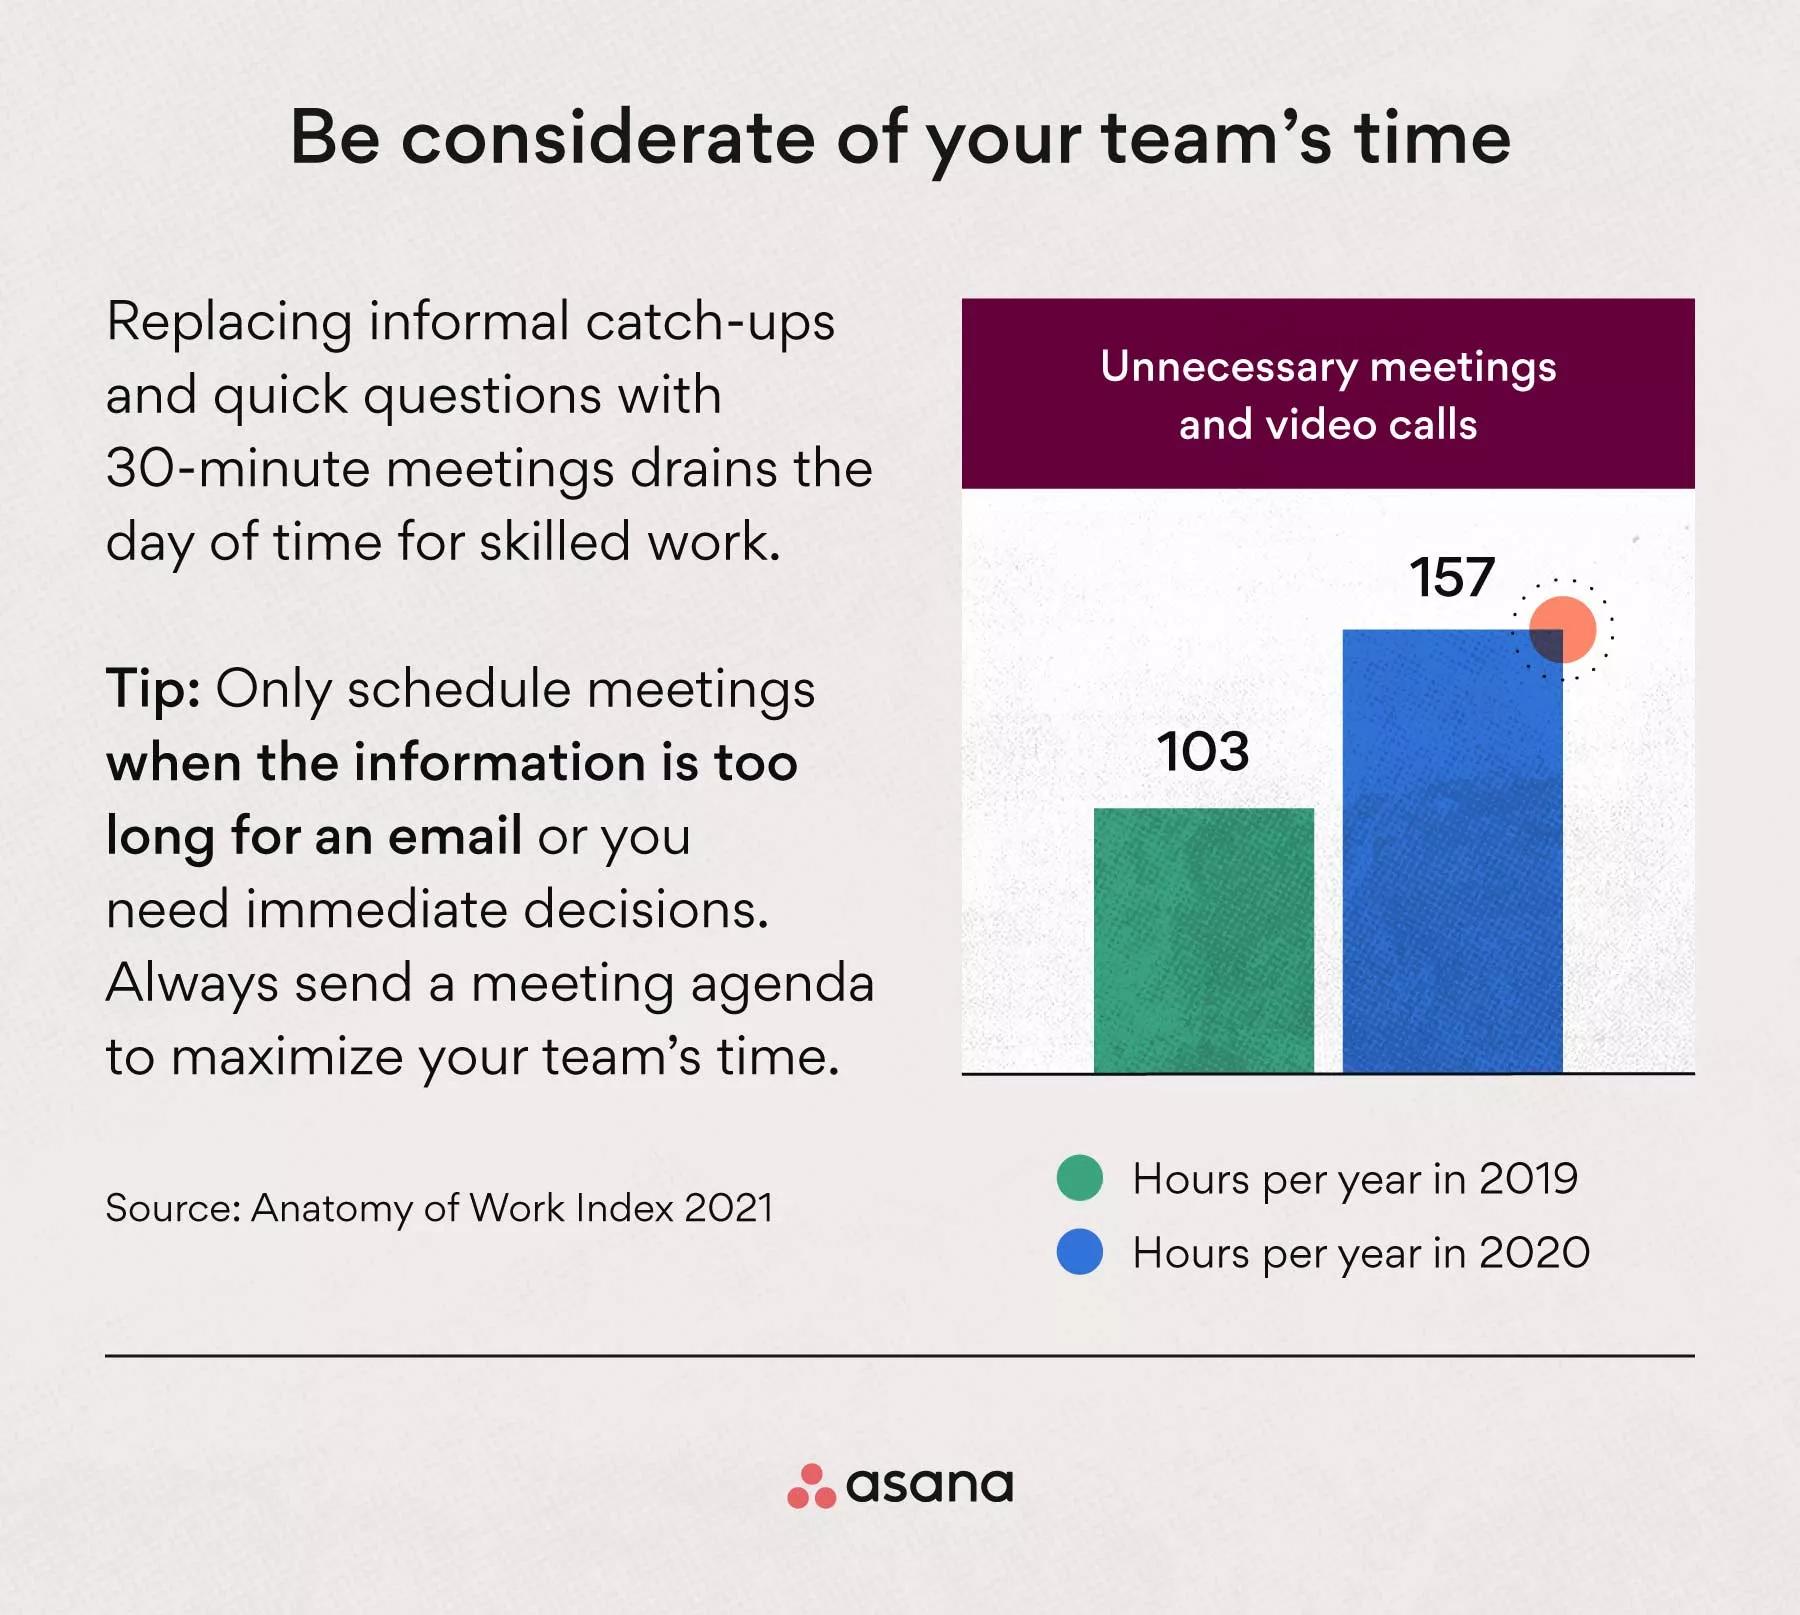 5 simple ways to develop an effective meeting agenda - Ayoa